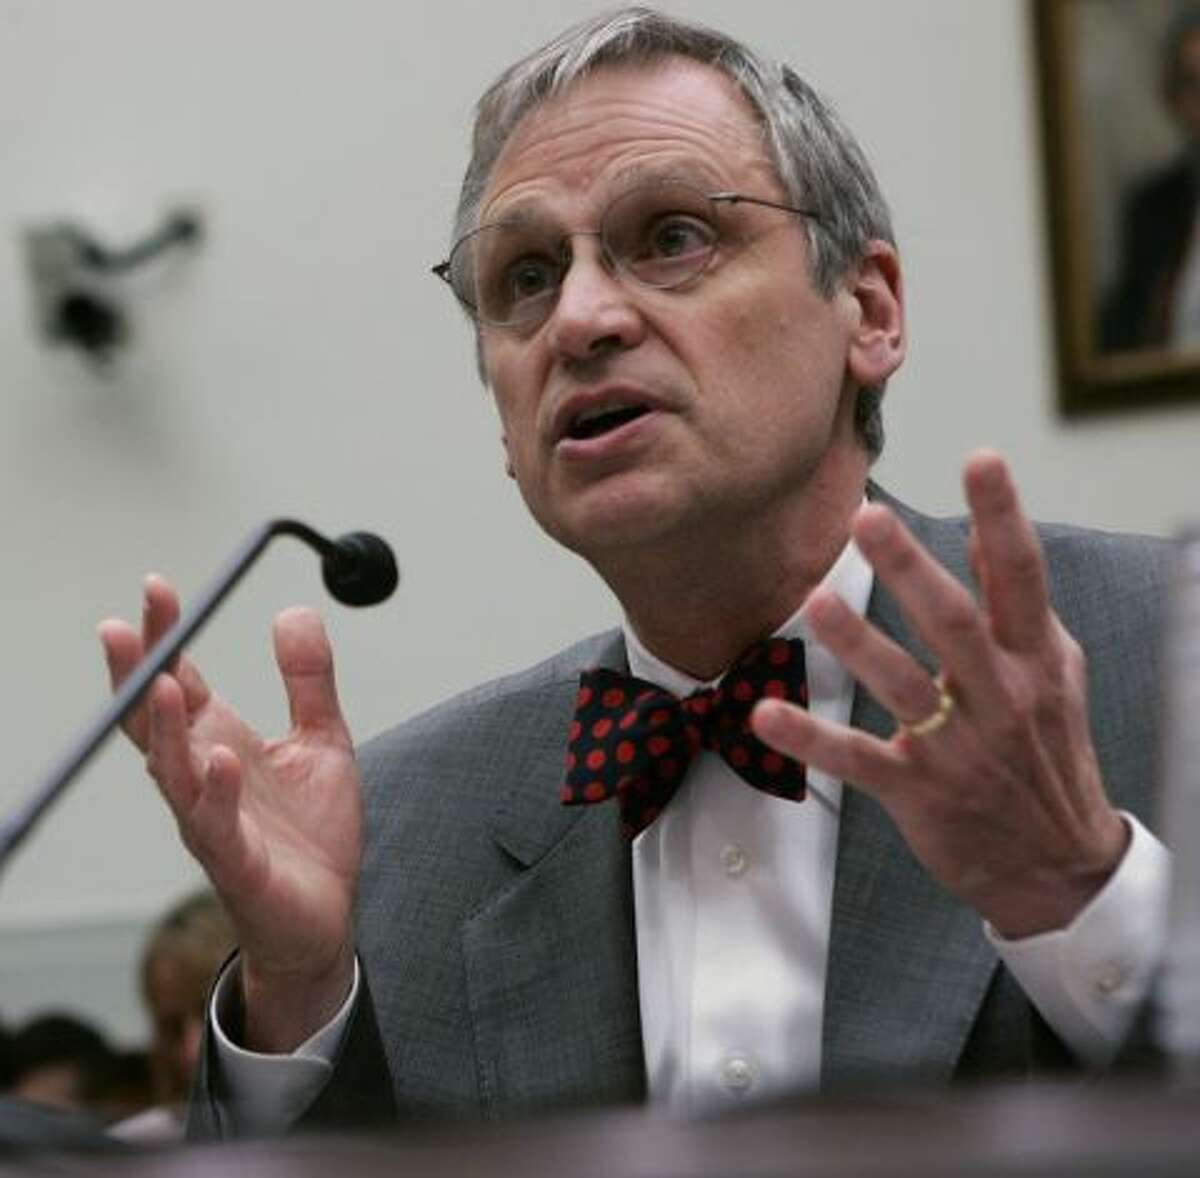 Rep. Earl Blumenauer (D-OR) joined Nebraska Republican Rep. Doug Bereuter in sponsoring the 2003 bill that, among other things, would have triggered buyouts for homes that experienced two flood losses. Ultimately, the bill was watered down. Now: Bluemnauer continues to champion flood insurance reform in Congress.